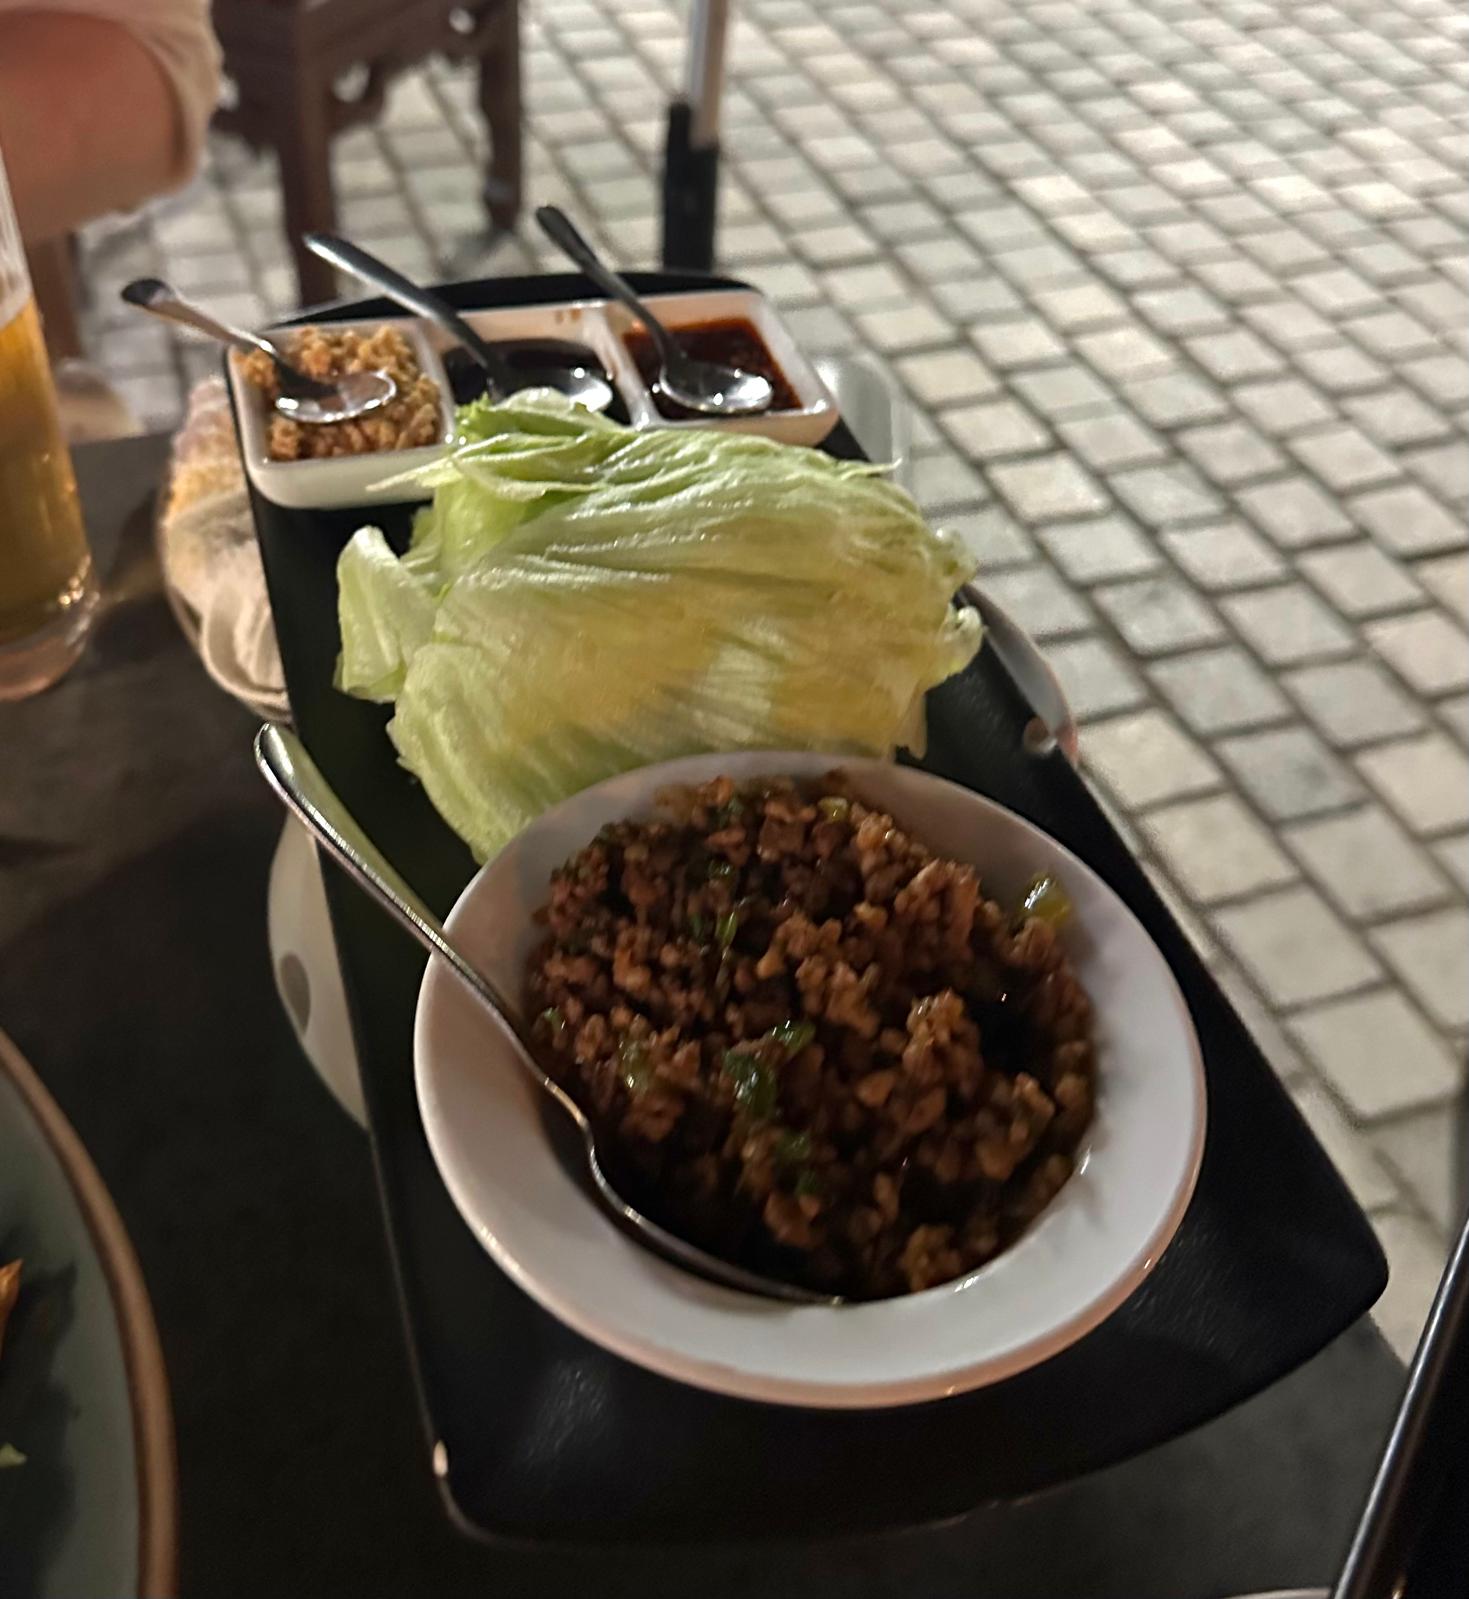 Spicy pork with lettuce leaves